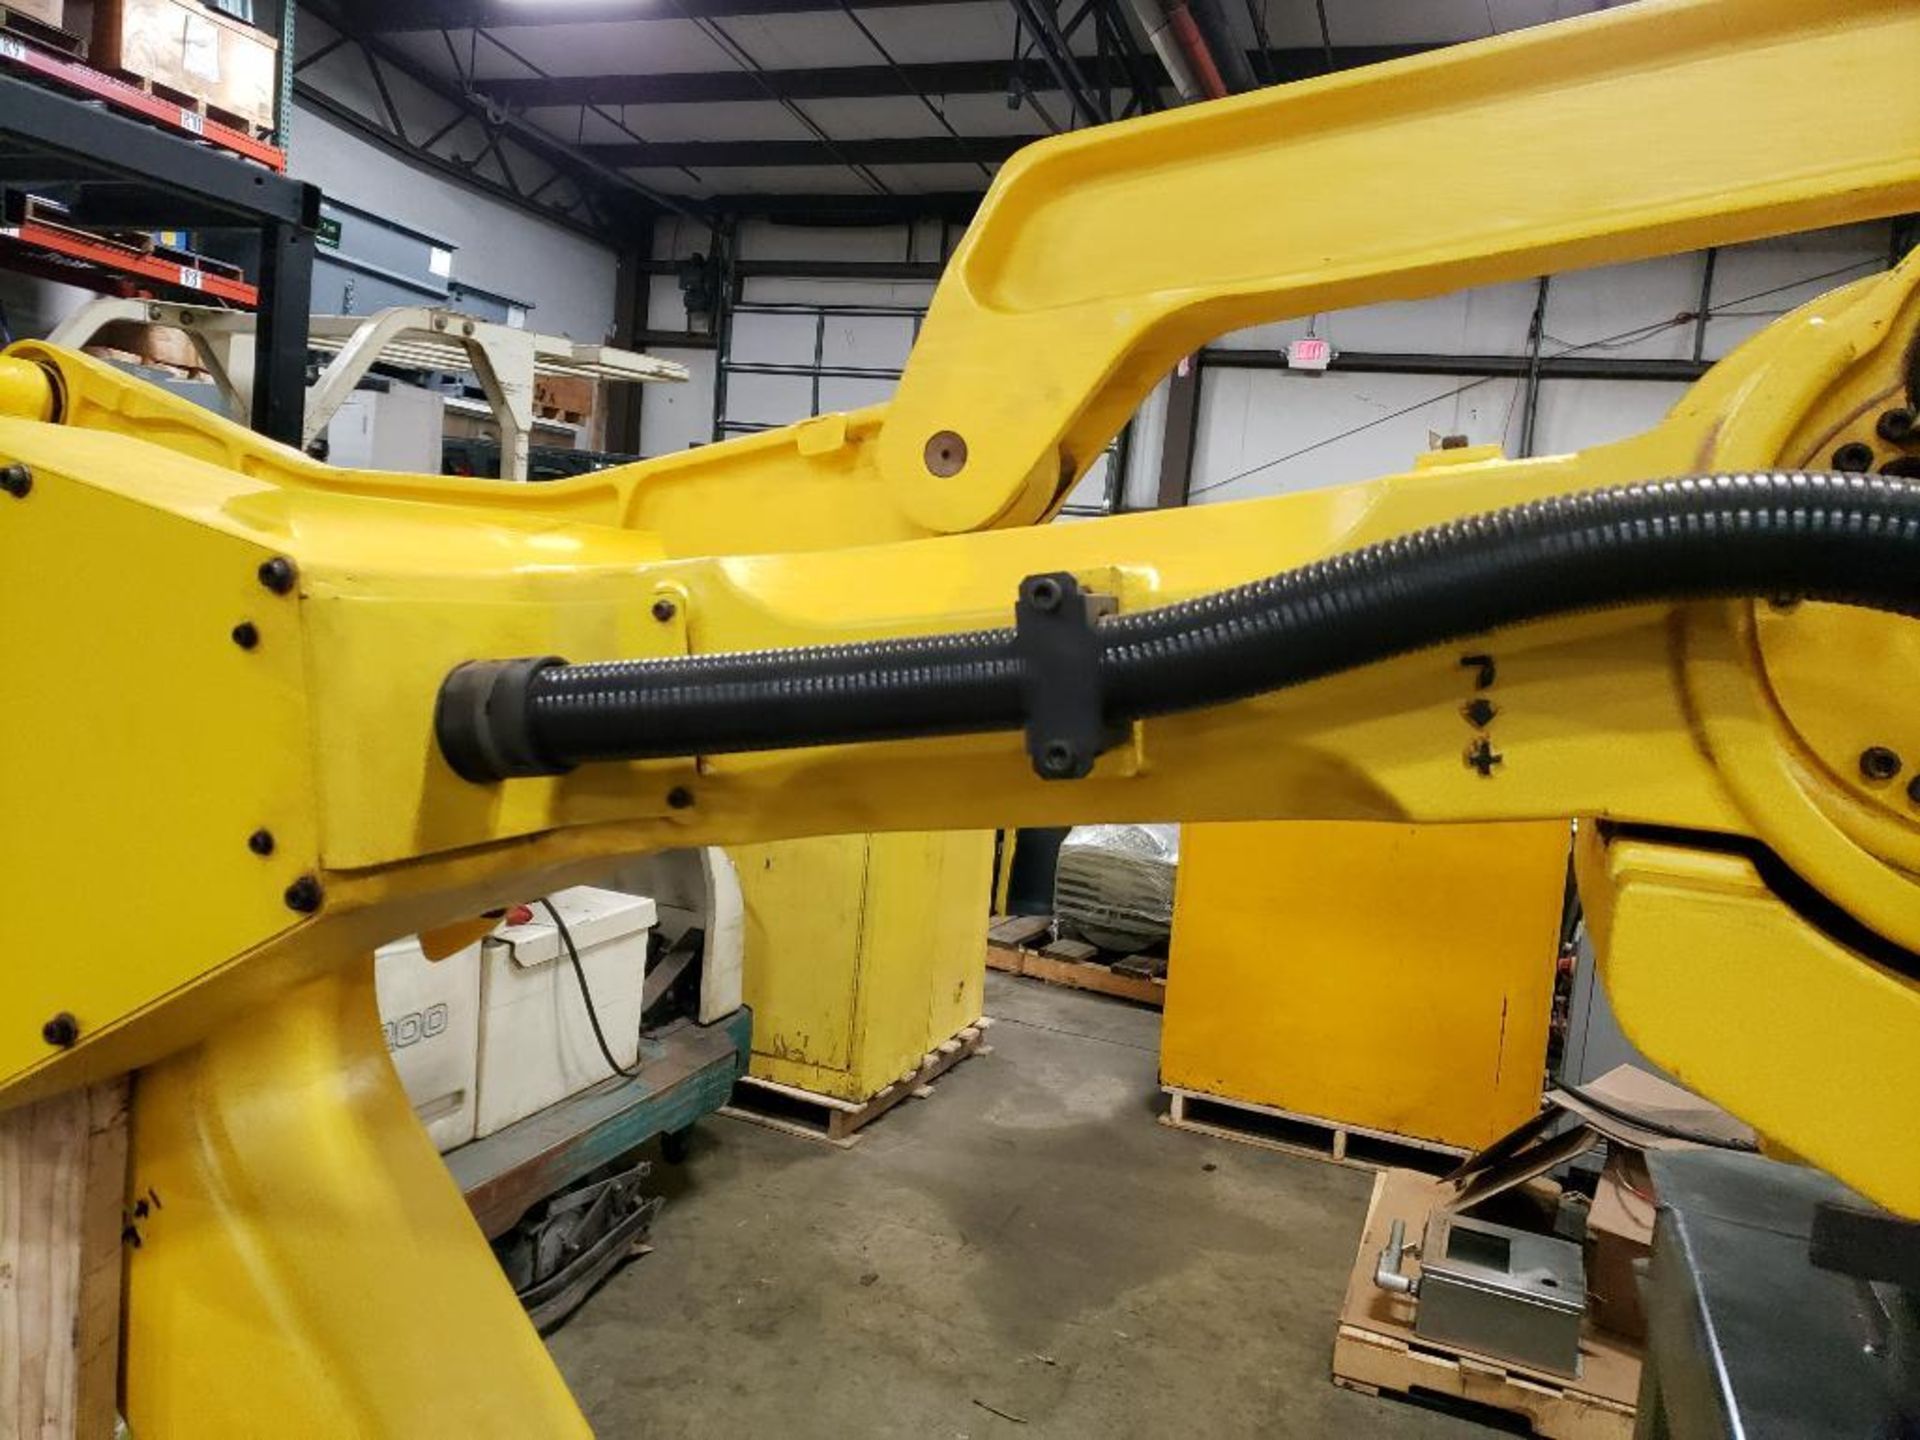 Fanuc M-410i HW robot arm. Does not include controller or cables. (cables have been cut) - Image 22 of 27